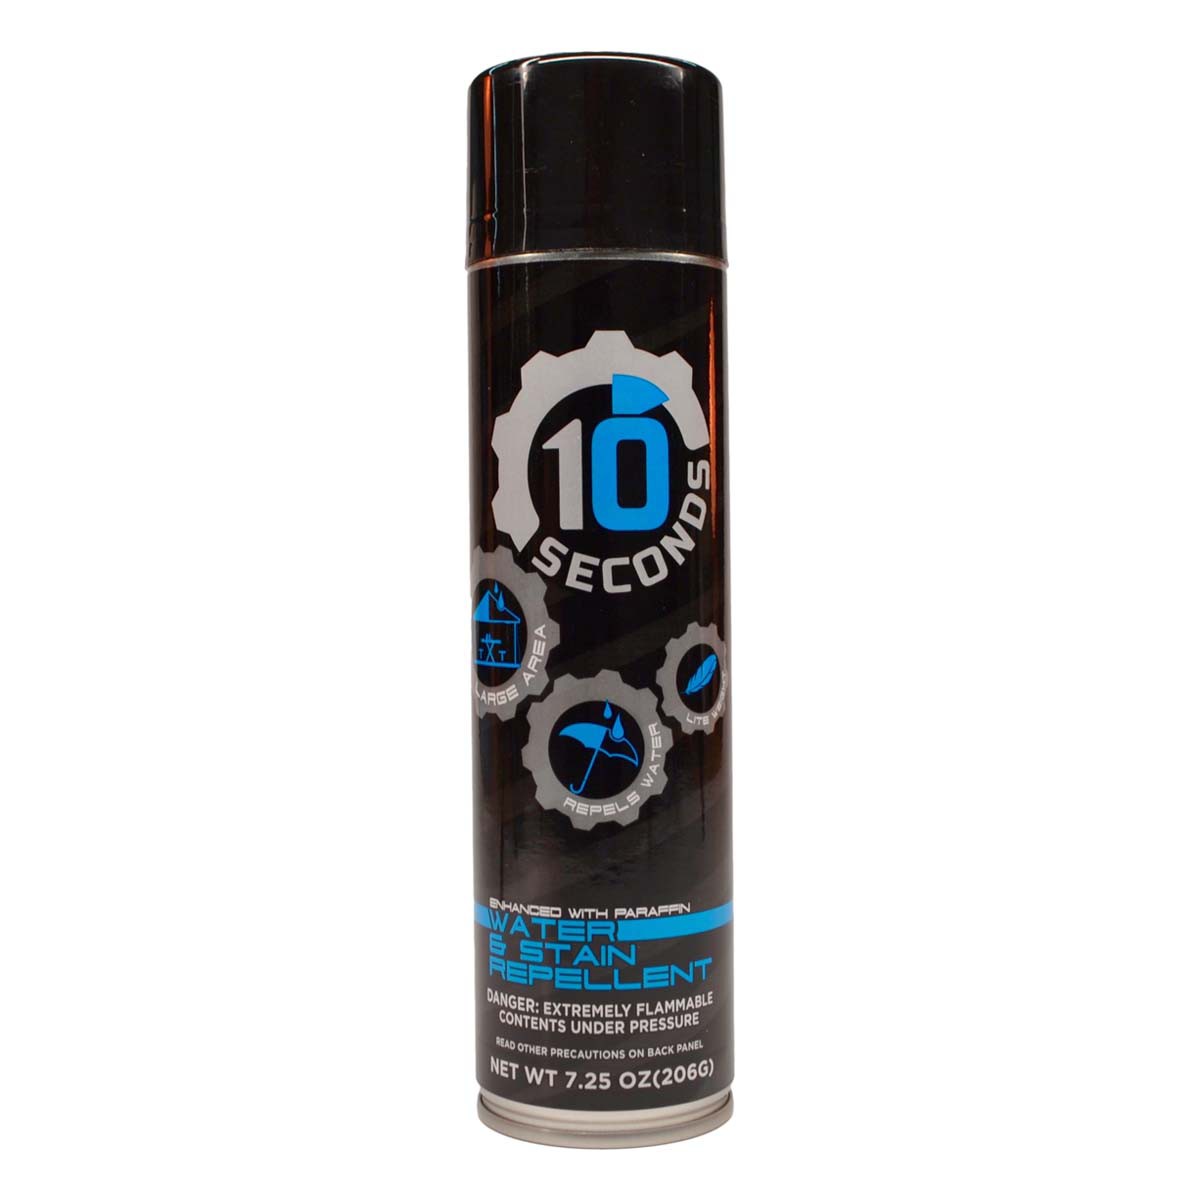 10 Seconds Water Repellent Spray, Products